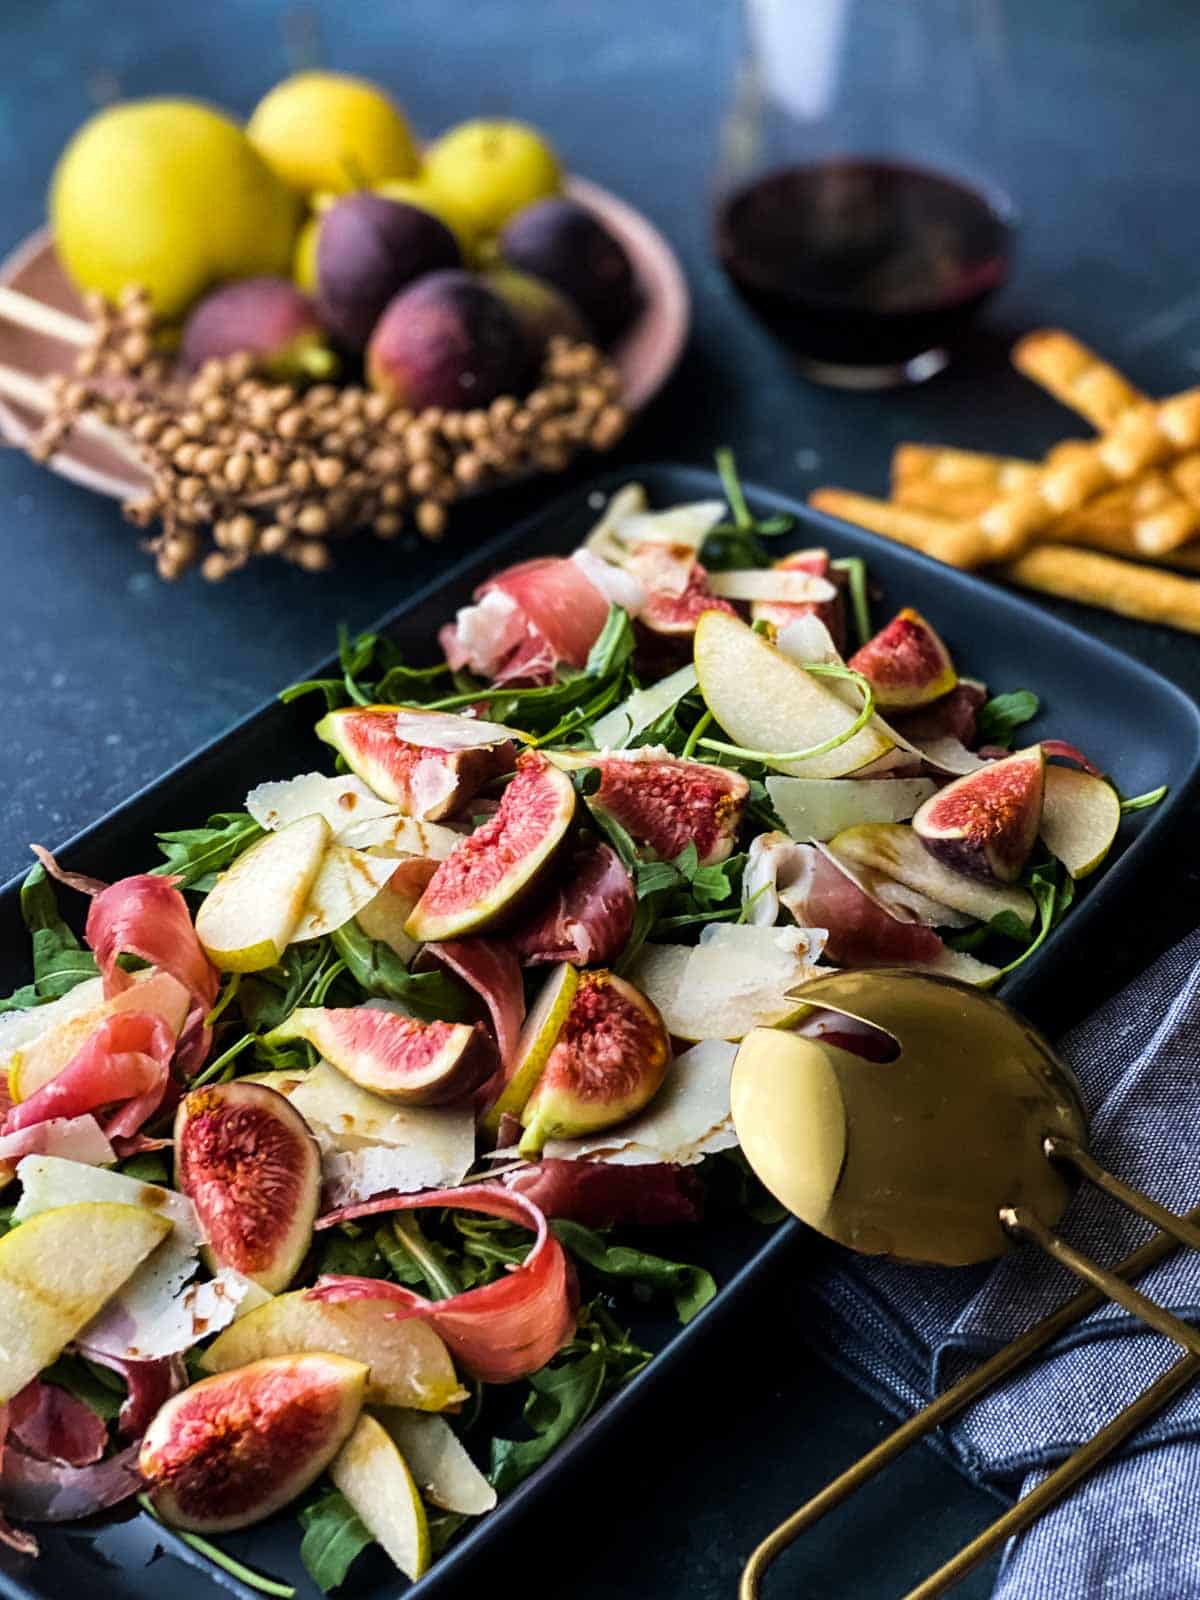 Sliced pears and figs on a dark platter with greens and a gold colored serving spoon.